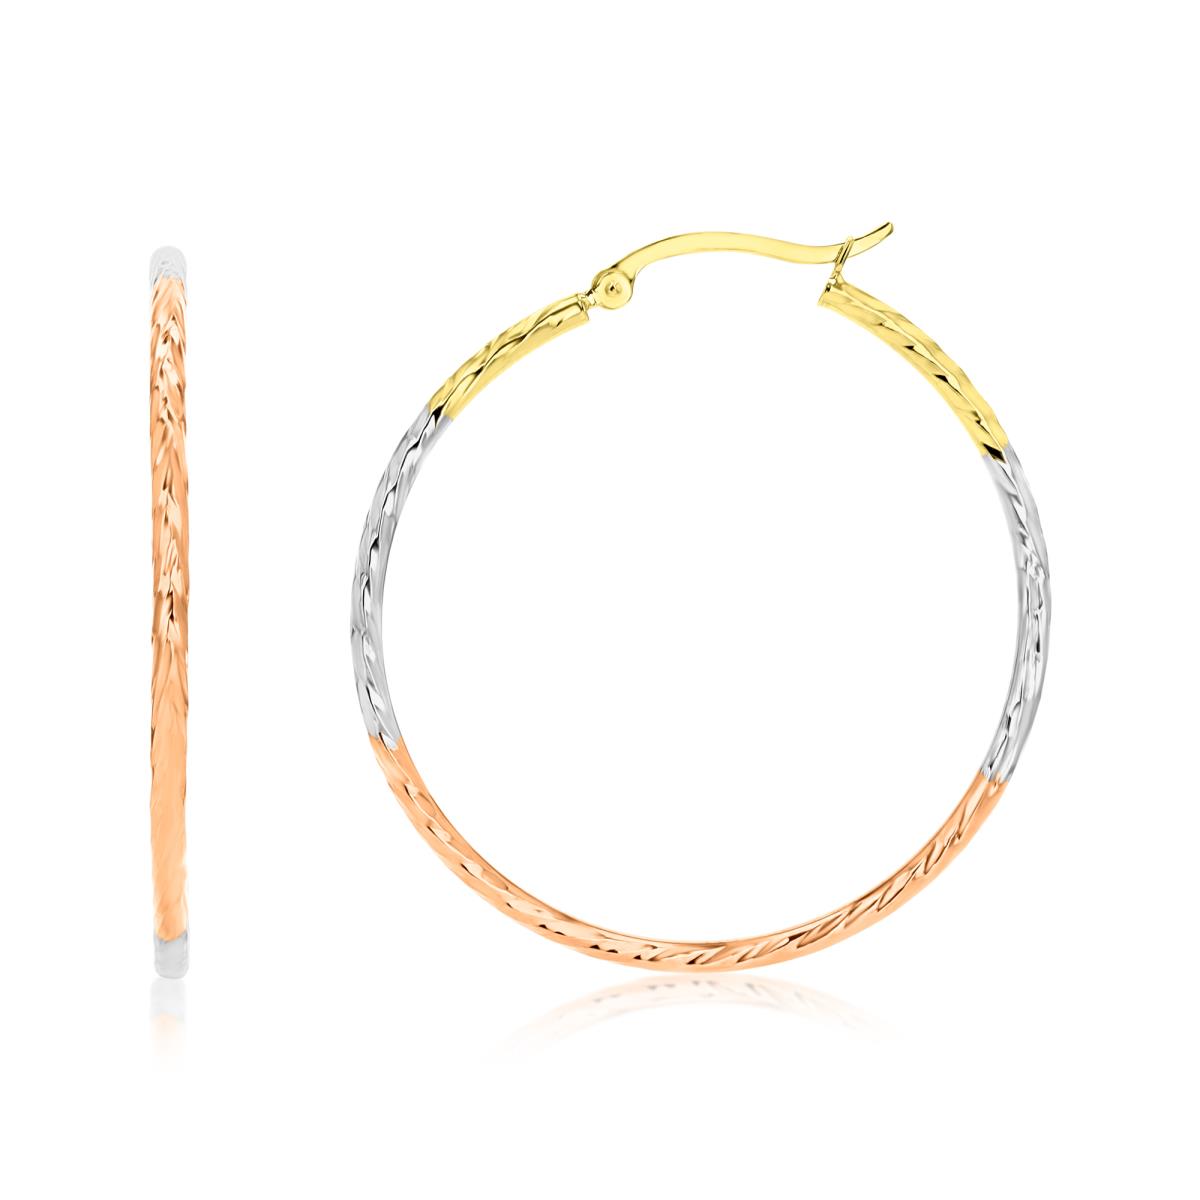 14K Gold Tricolor 2x40mm (1.50") Twisted DC Hoop Earring